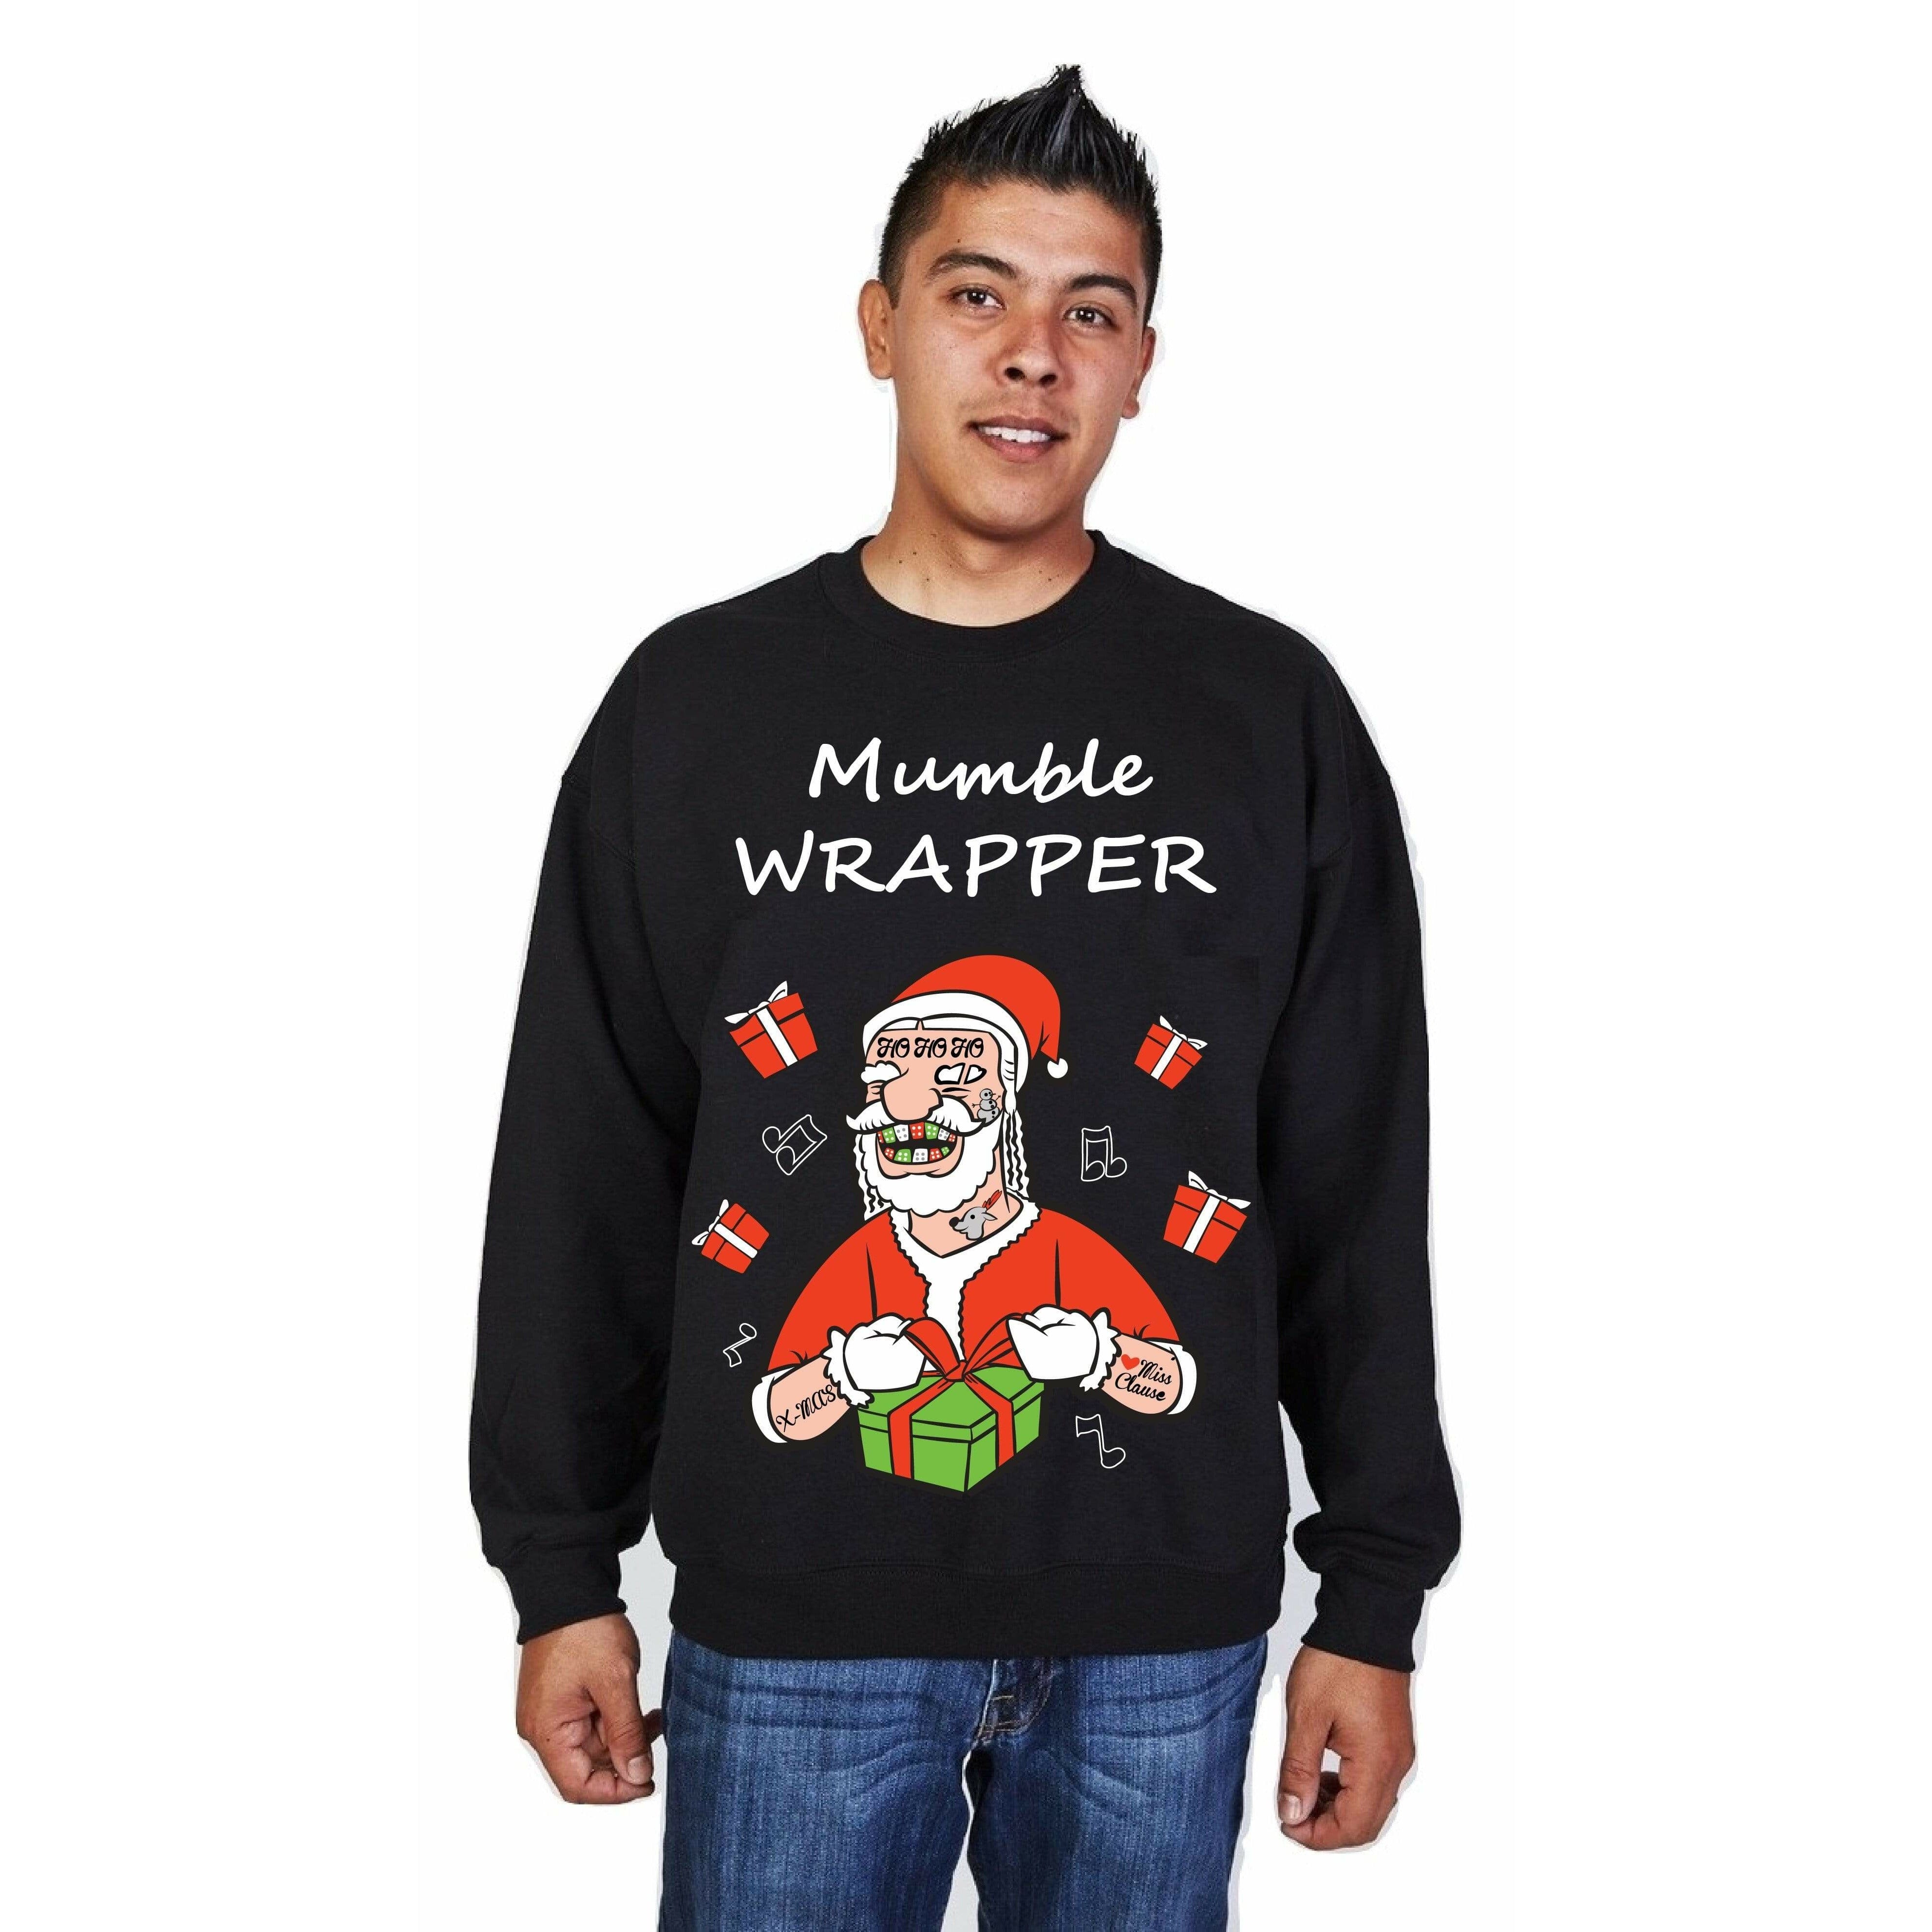 MUMBLE WRAPPER - Black "Ugly" Christmas Sweaters Snowtorious 